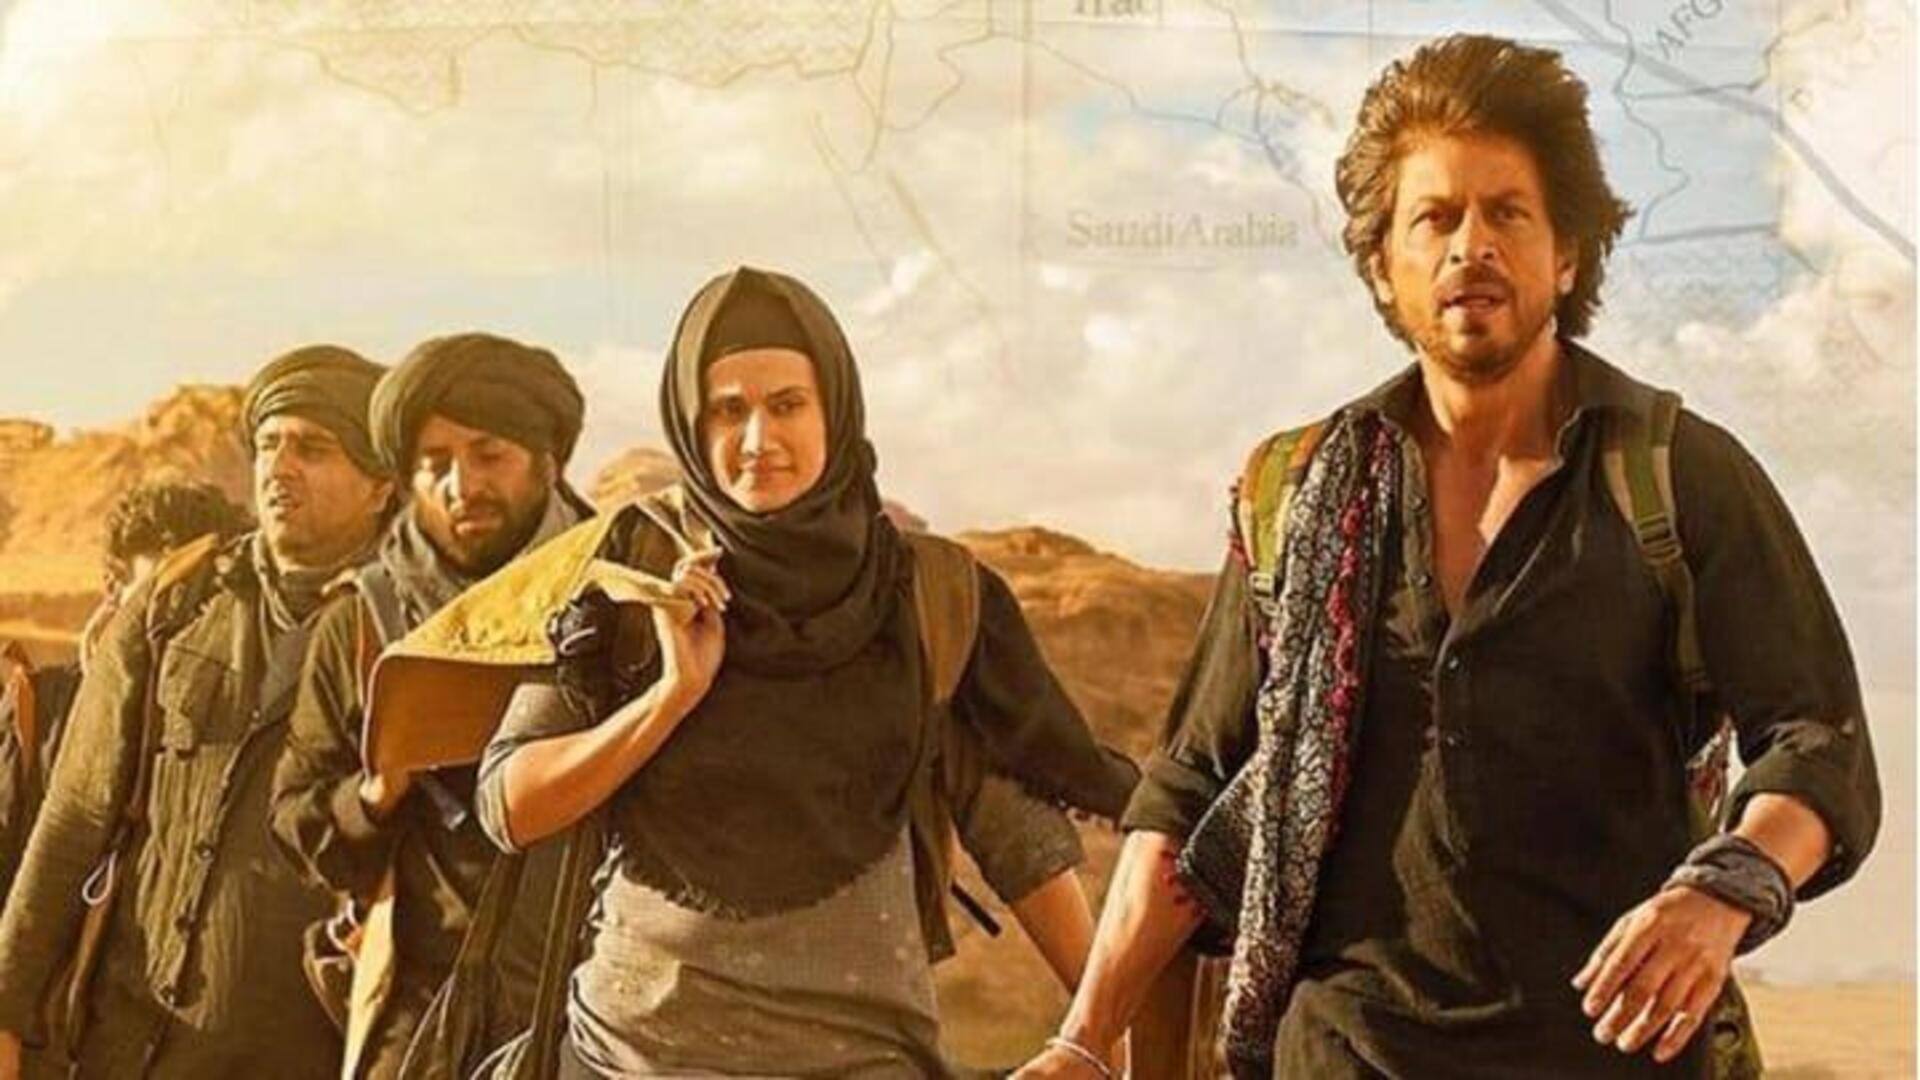 Here's when Shah Rukh Khan's 'Dunki' trailer will be out